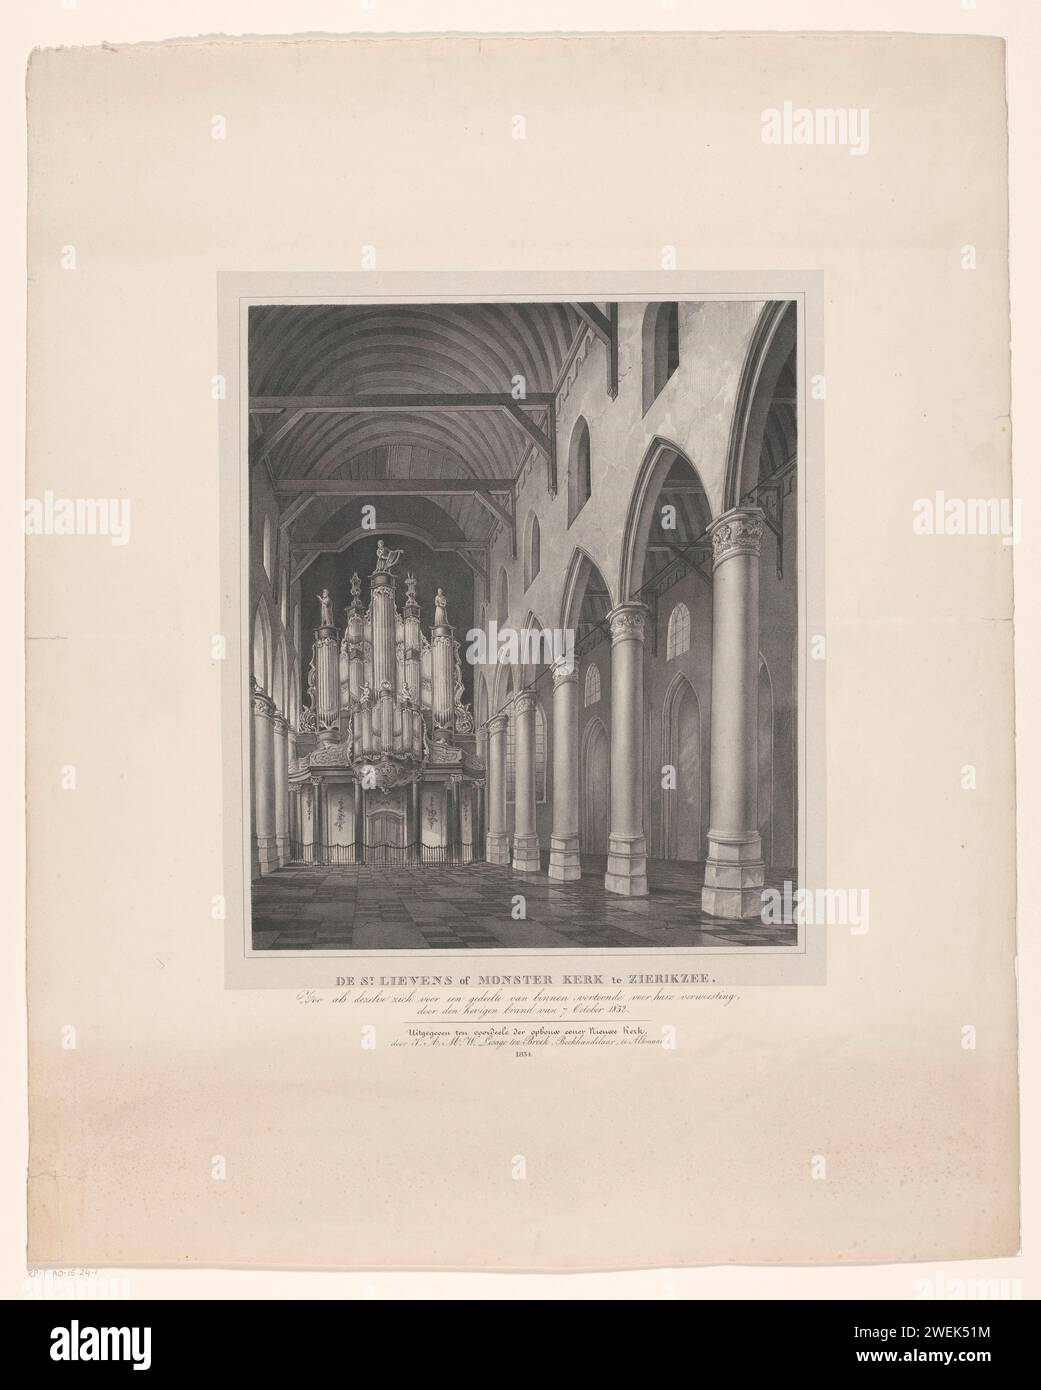 Interior of the Sint-Lievensmonsterkerk in Zierikzee, before the fire of 1832, Anonymous, After Jacob Korsten, 1834 print Interior of the Sint-Lievensmonsterkerk in Zierikzee, in Welstand, before the fire of October 6, 1832. Face from the interior towards the organ. The church has a wooden ceiling. On the right a side aisle, separated from the ship by columns.  paper  parts of church interior. church organ Sint-Lievensmonsterkerk Stock Photo